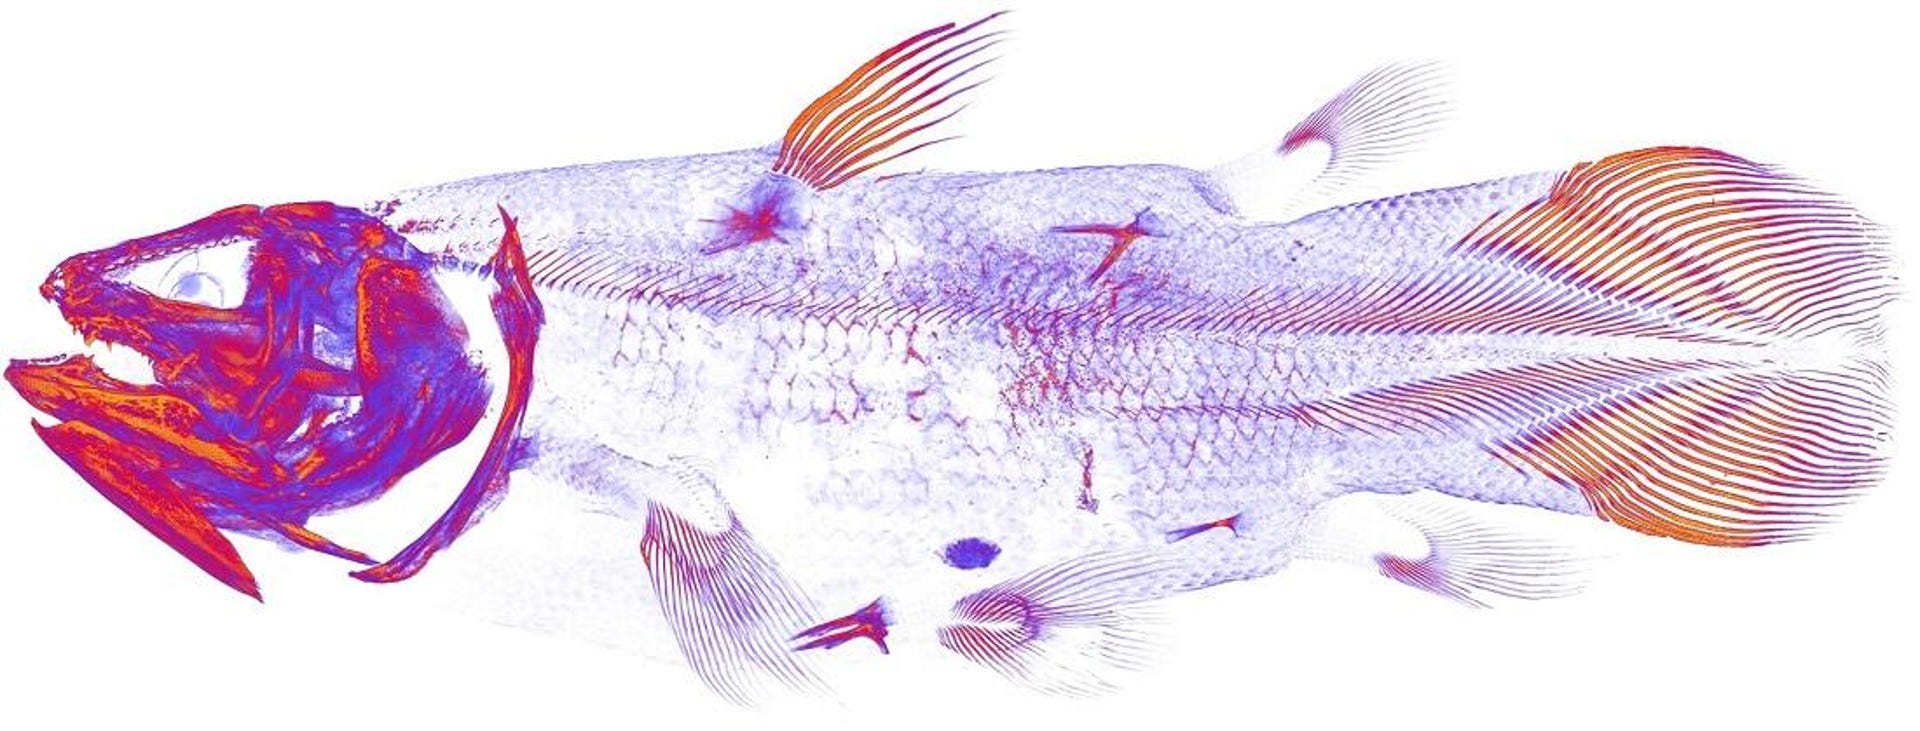 CT image shows the brightly colored bone structure of a coelacanth fish.